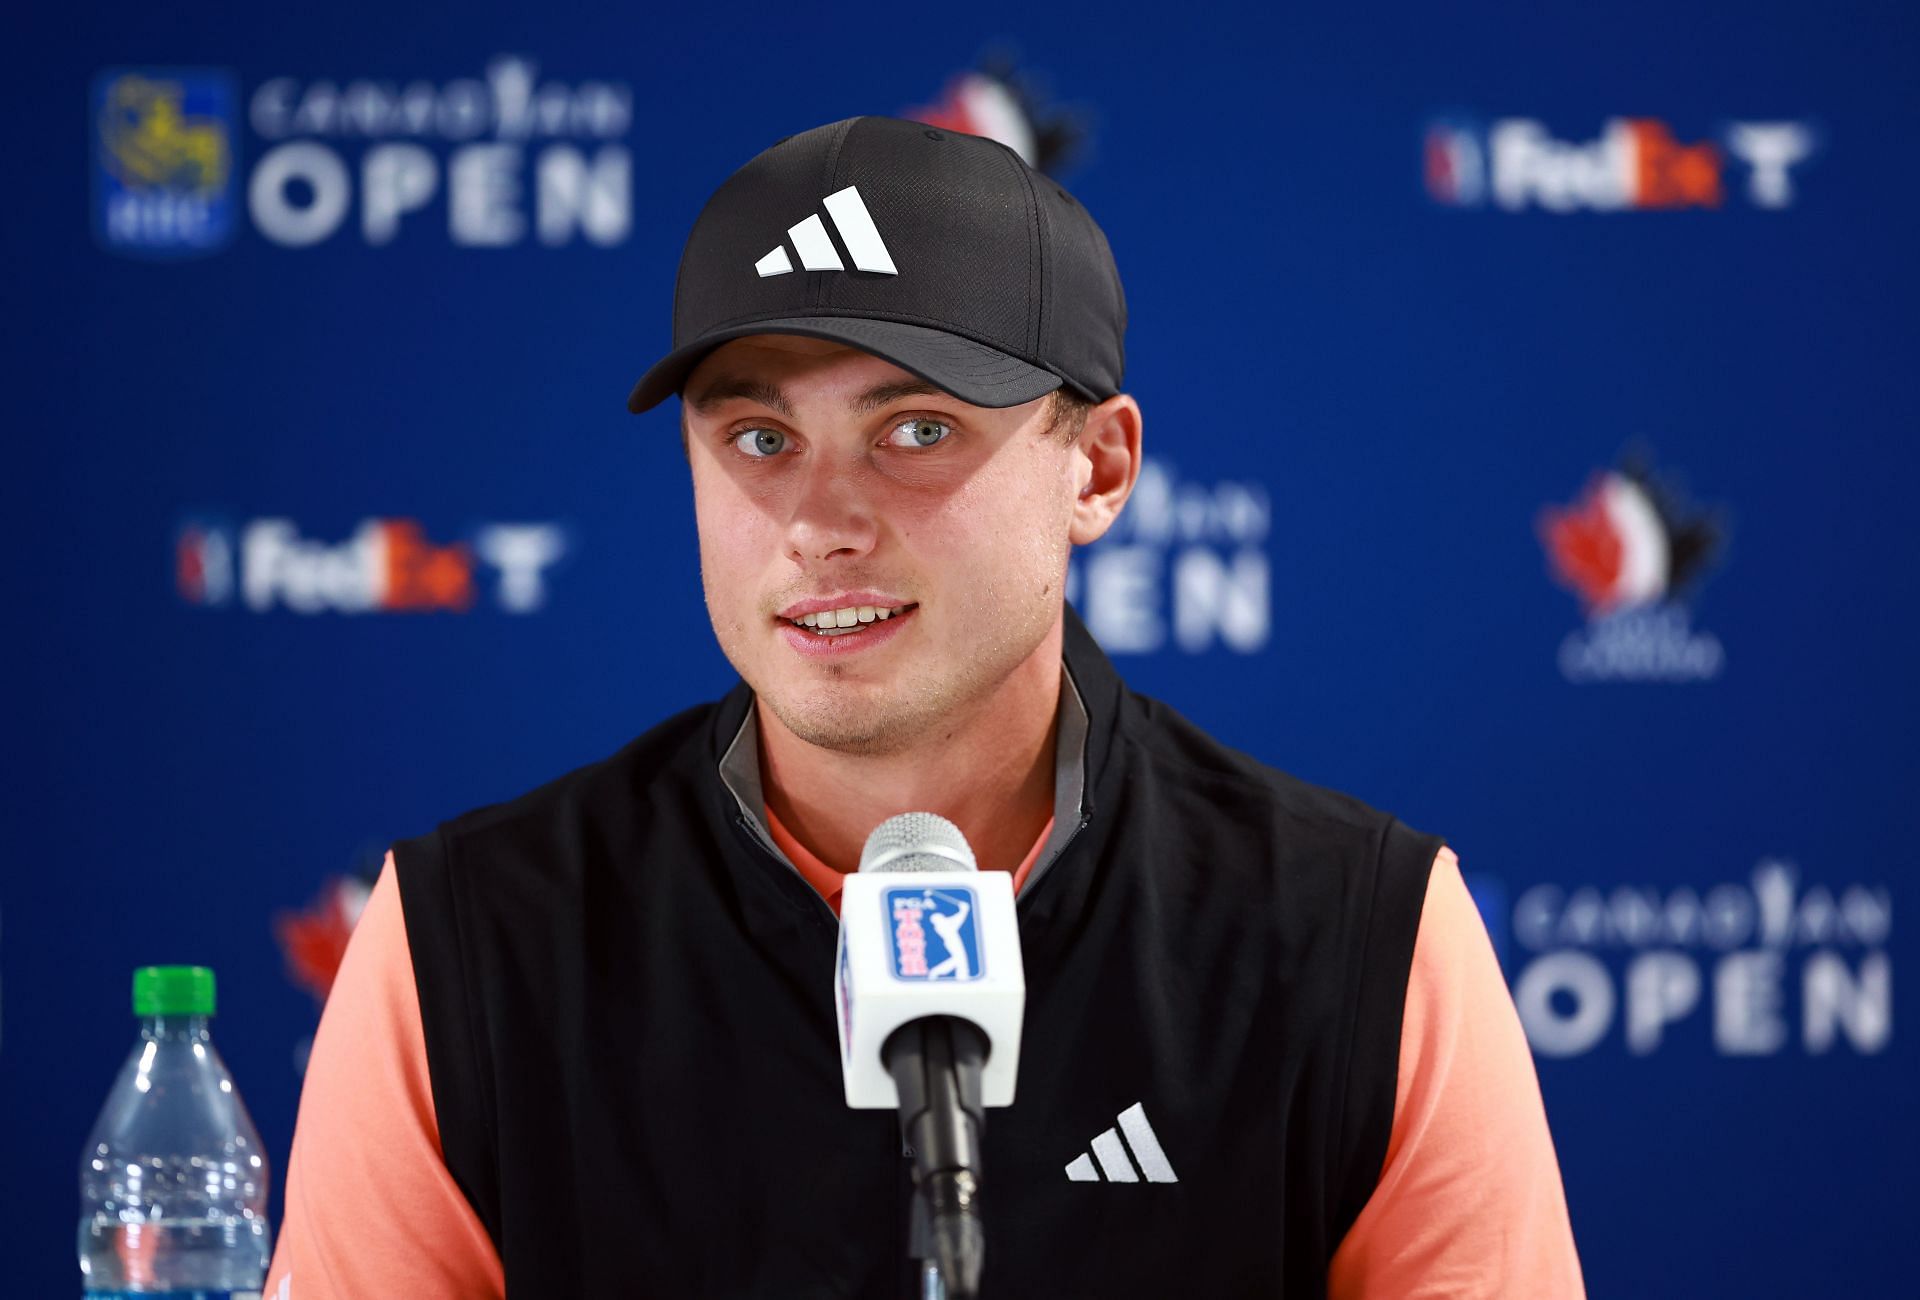 RBC Canadian Open - Previews